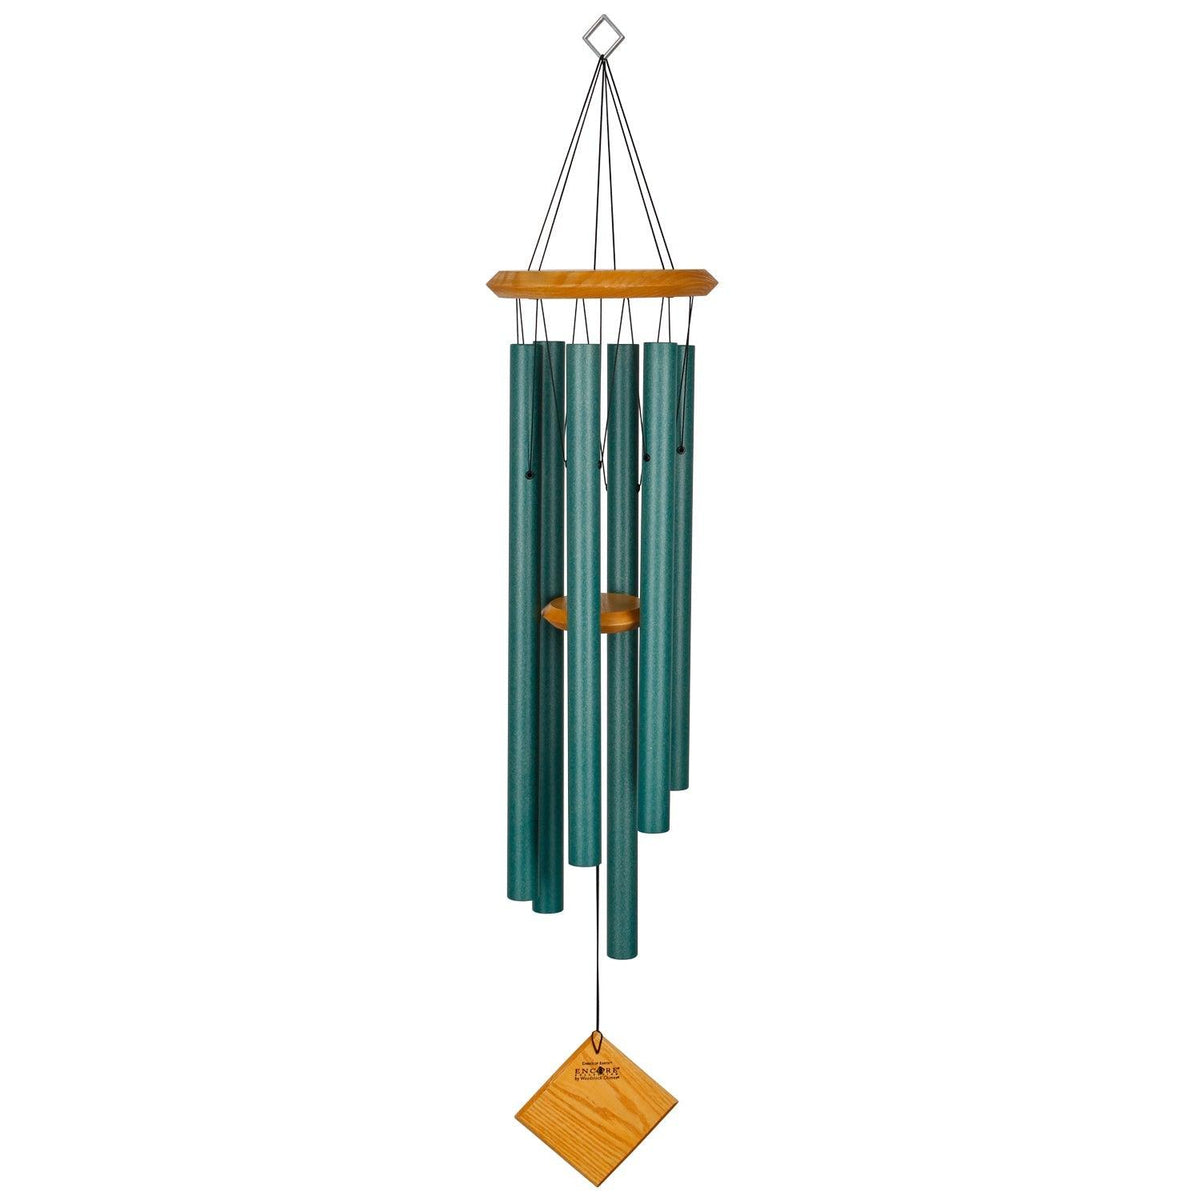 Beautifully crafted with cherry finish wood and six verdigris aluminum tubes, this windchime measures 37 inches long and 7 inches in diameter. It&#39;s a charming addition to any outdoor space, providing soothing sounds and a touch of elegance.